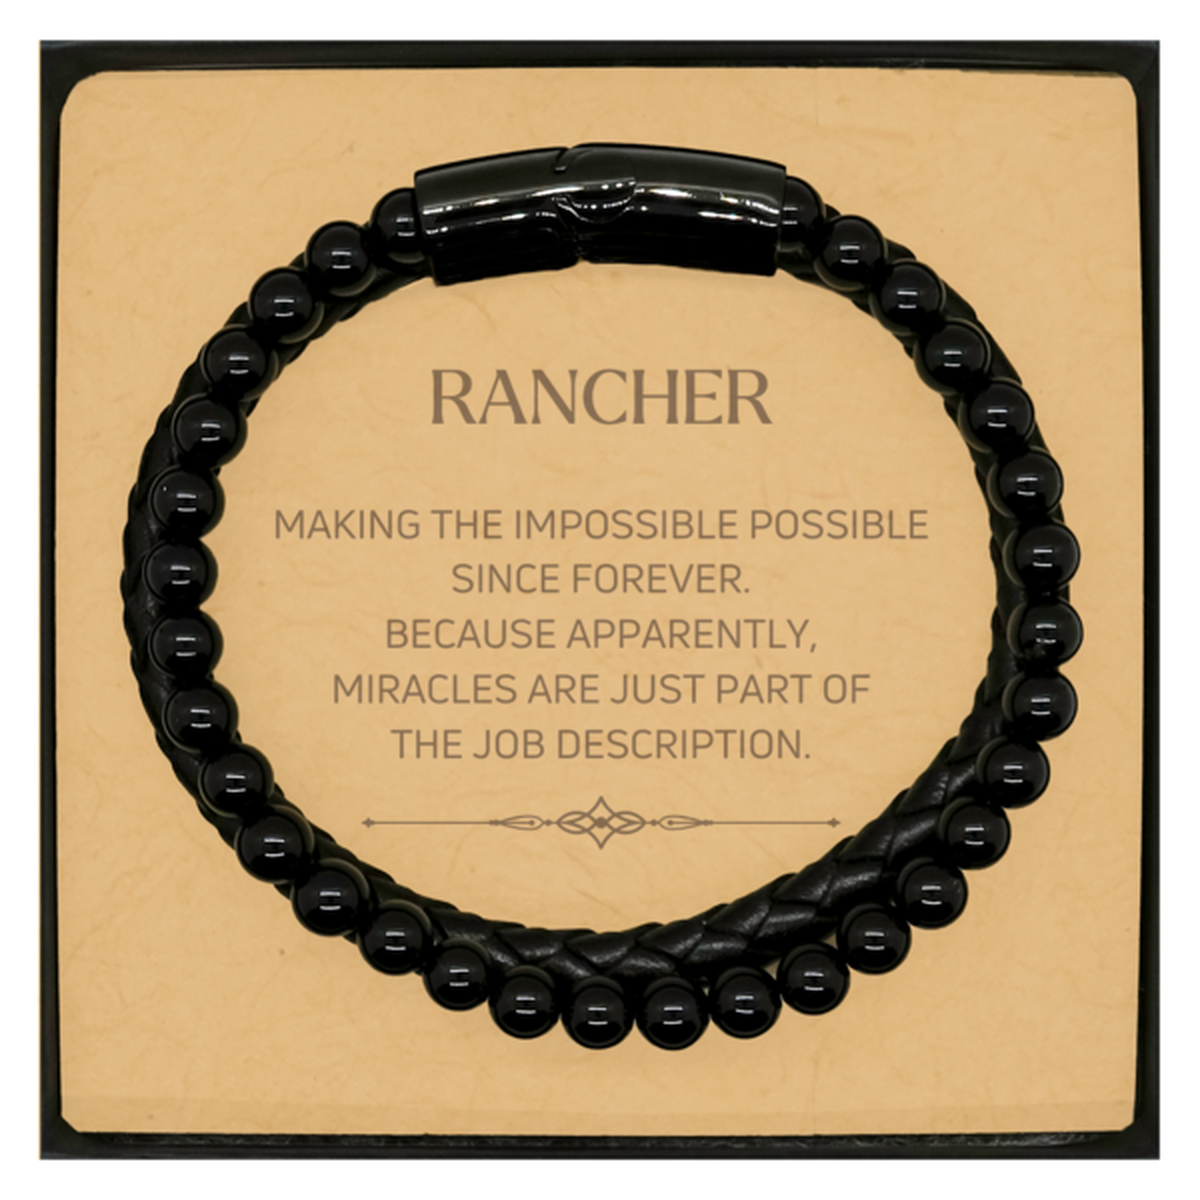 Funny Rancher Gifts, Miracles are just part of the job description, Inspirational Birthday Christmas Stone Leather Bracelets For Rancher, Men, Women, Coworkers, Friends, Boss